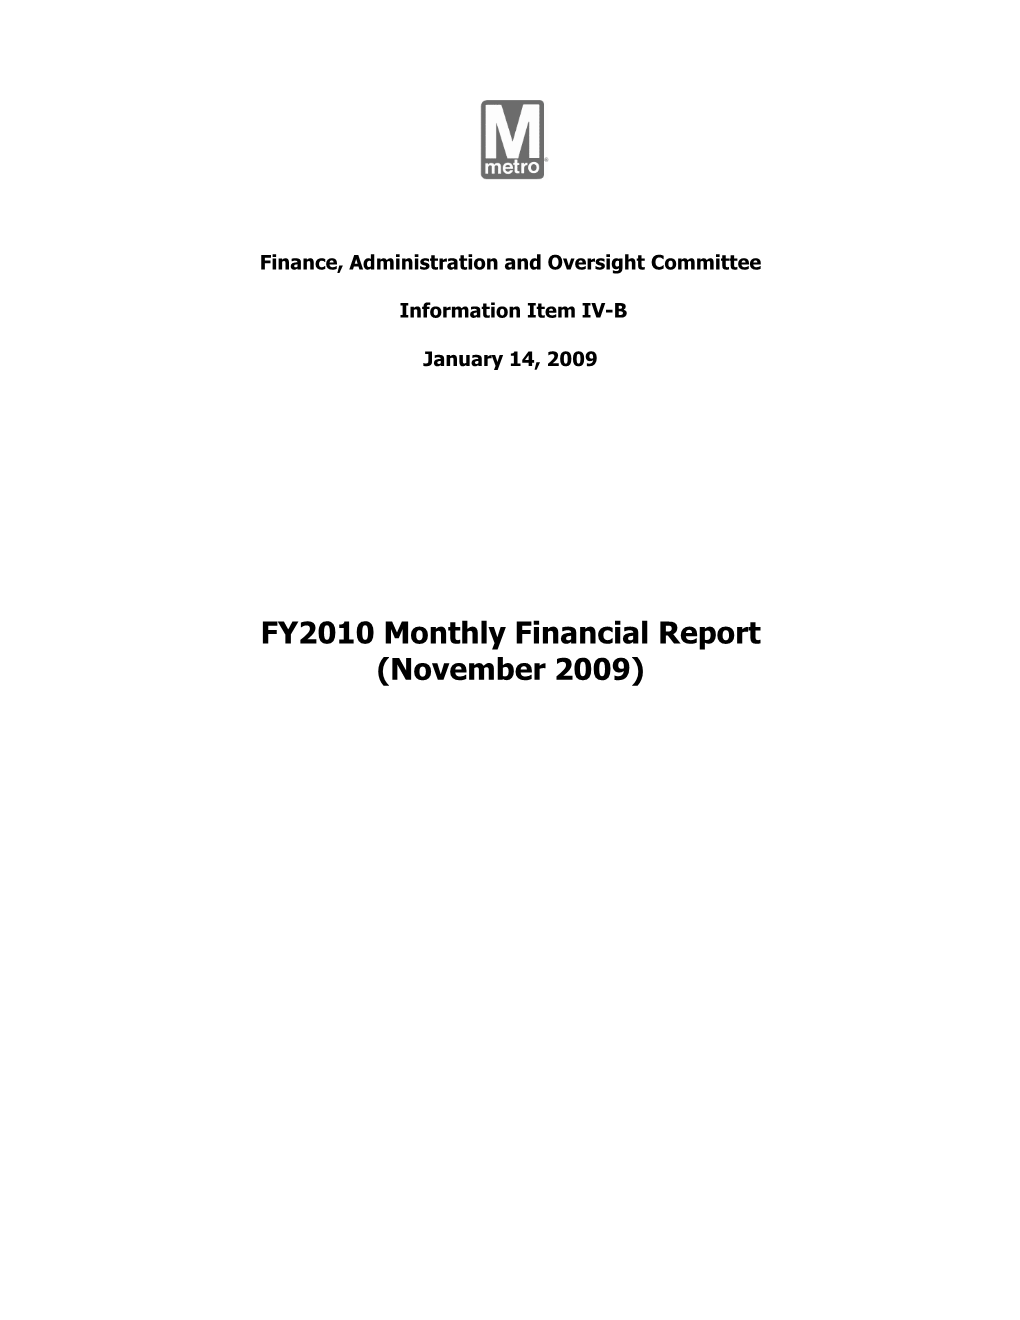 FY2010 Monthly Financial Report (November 2009)